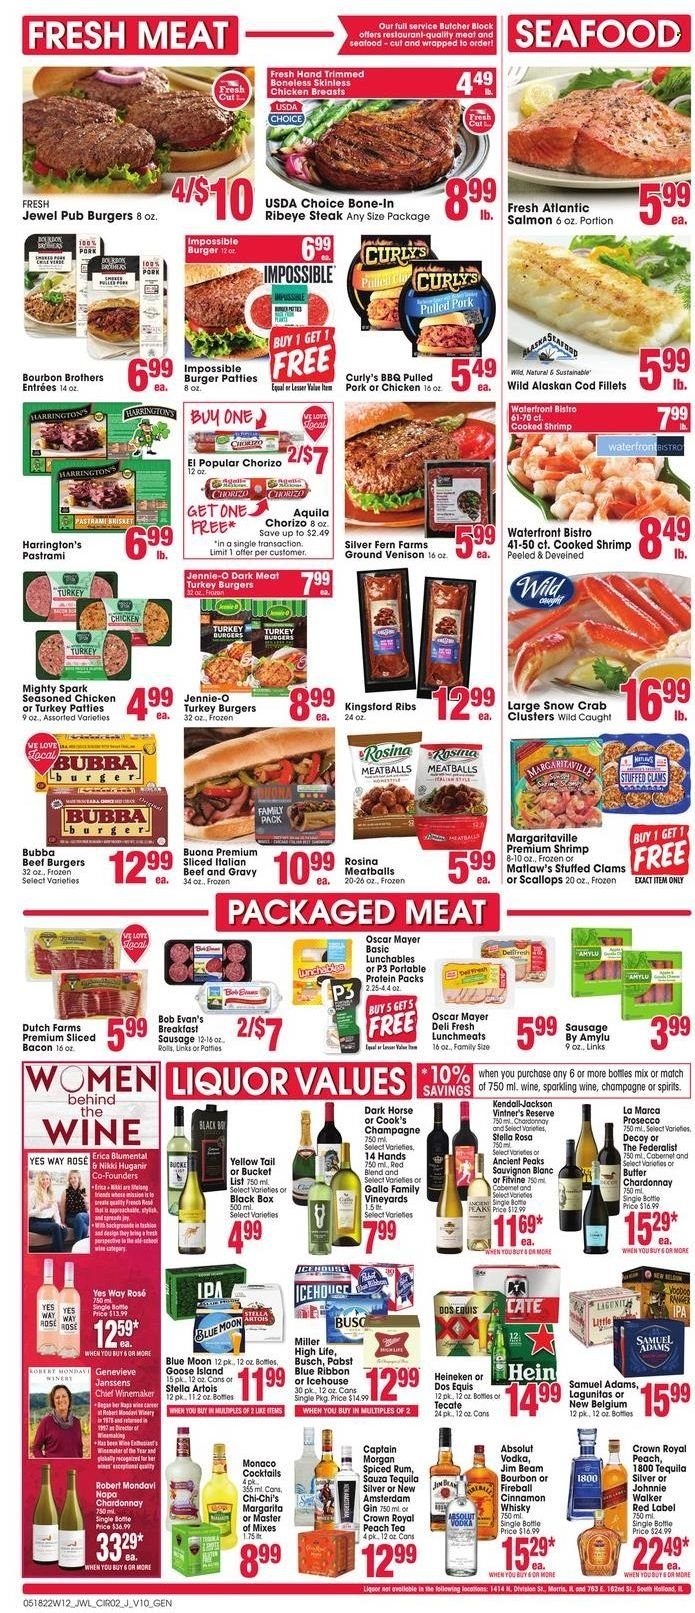 thumbnail - Jewel Osco Flyer - 05/18/2022 - 05/24/2022 - Sales products - venison meat, ground venison, clams, cod, salmon, scallops, seafood, crab, shrimps, meatballs, hamburger, beef burger, Lunchables, pulled pork, bacon, pastrami, chorizo, Cook's, Oscar Mayer, sausage, lunch meat, butter, tea, sparkling wine, white wine, champagne, prosecco, Chardonnay, wine, Gallo Family, Sauvignon Blanc, rosé wine, Captain Morgan, gin, rum, spiced rum, tequila, vodka, liquor, Absolut, BROTHERS, Jim Beam, cinnamon whisky, whisky, beer, Busch, Heineken, Miller, IPA, Pabst Blue Ribbon, chicken breasts, beef meat, beef steak, steak, ribeye steak, burger patties, turkey burger, pork meat, Stella Artois, Dos Equis, Blue Moon. Page 2.